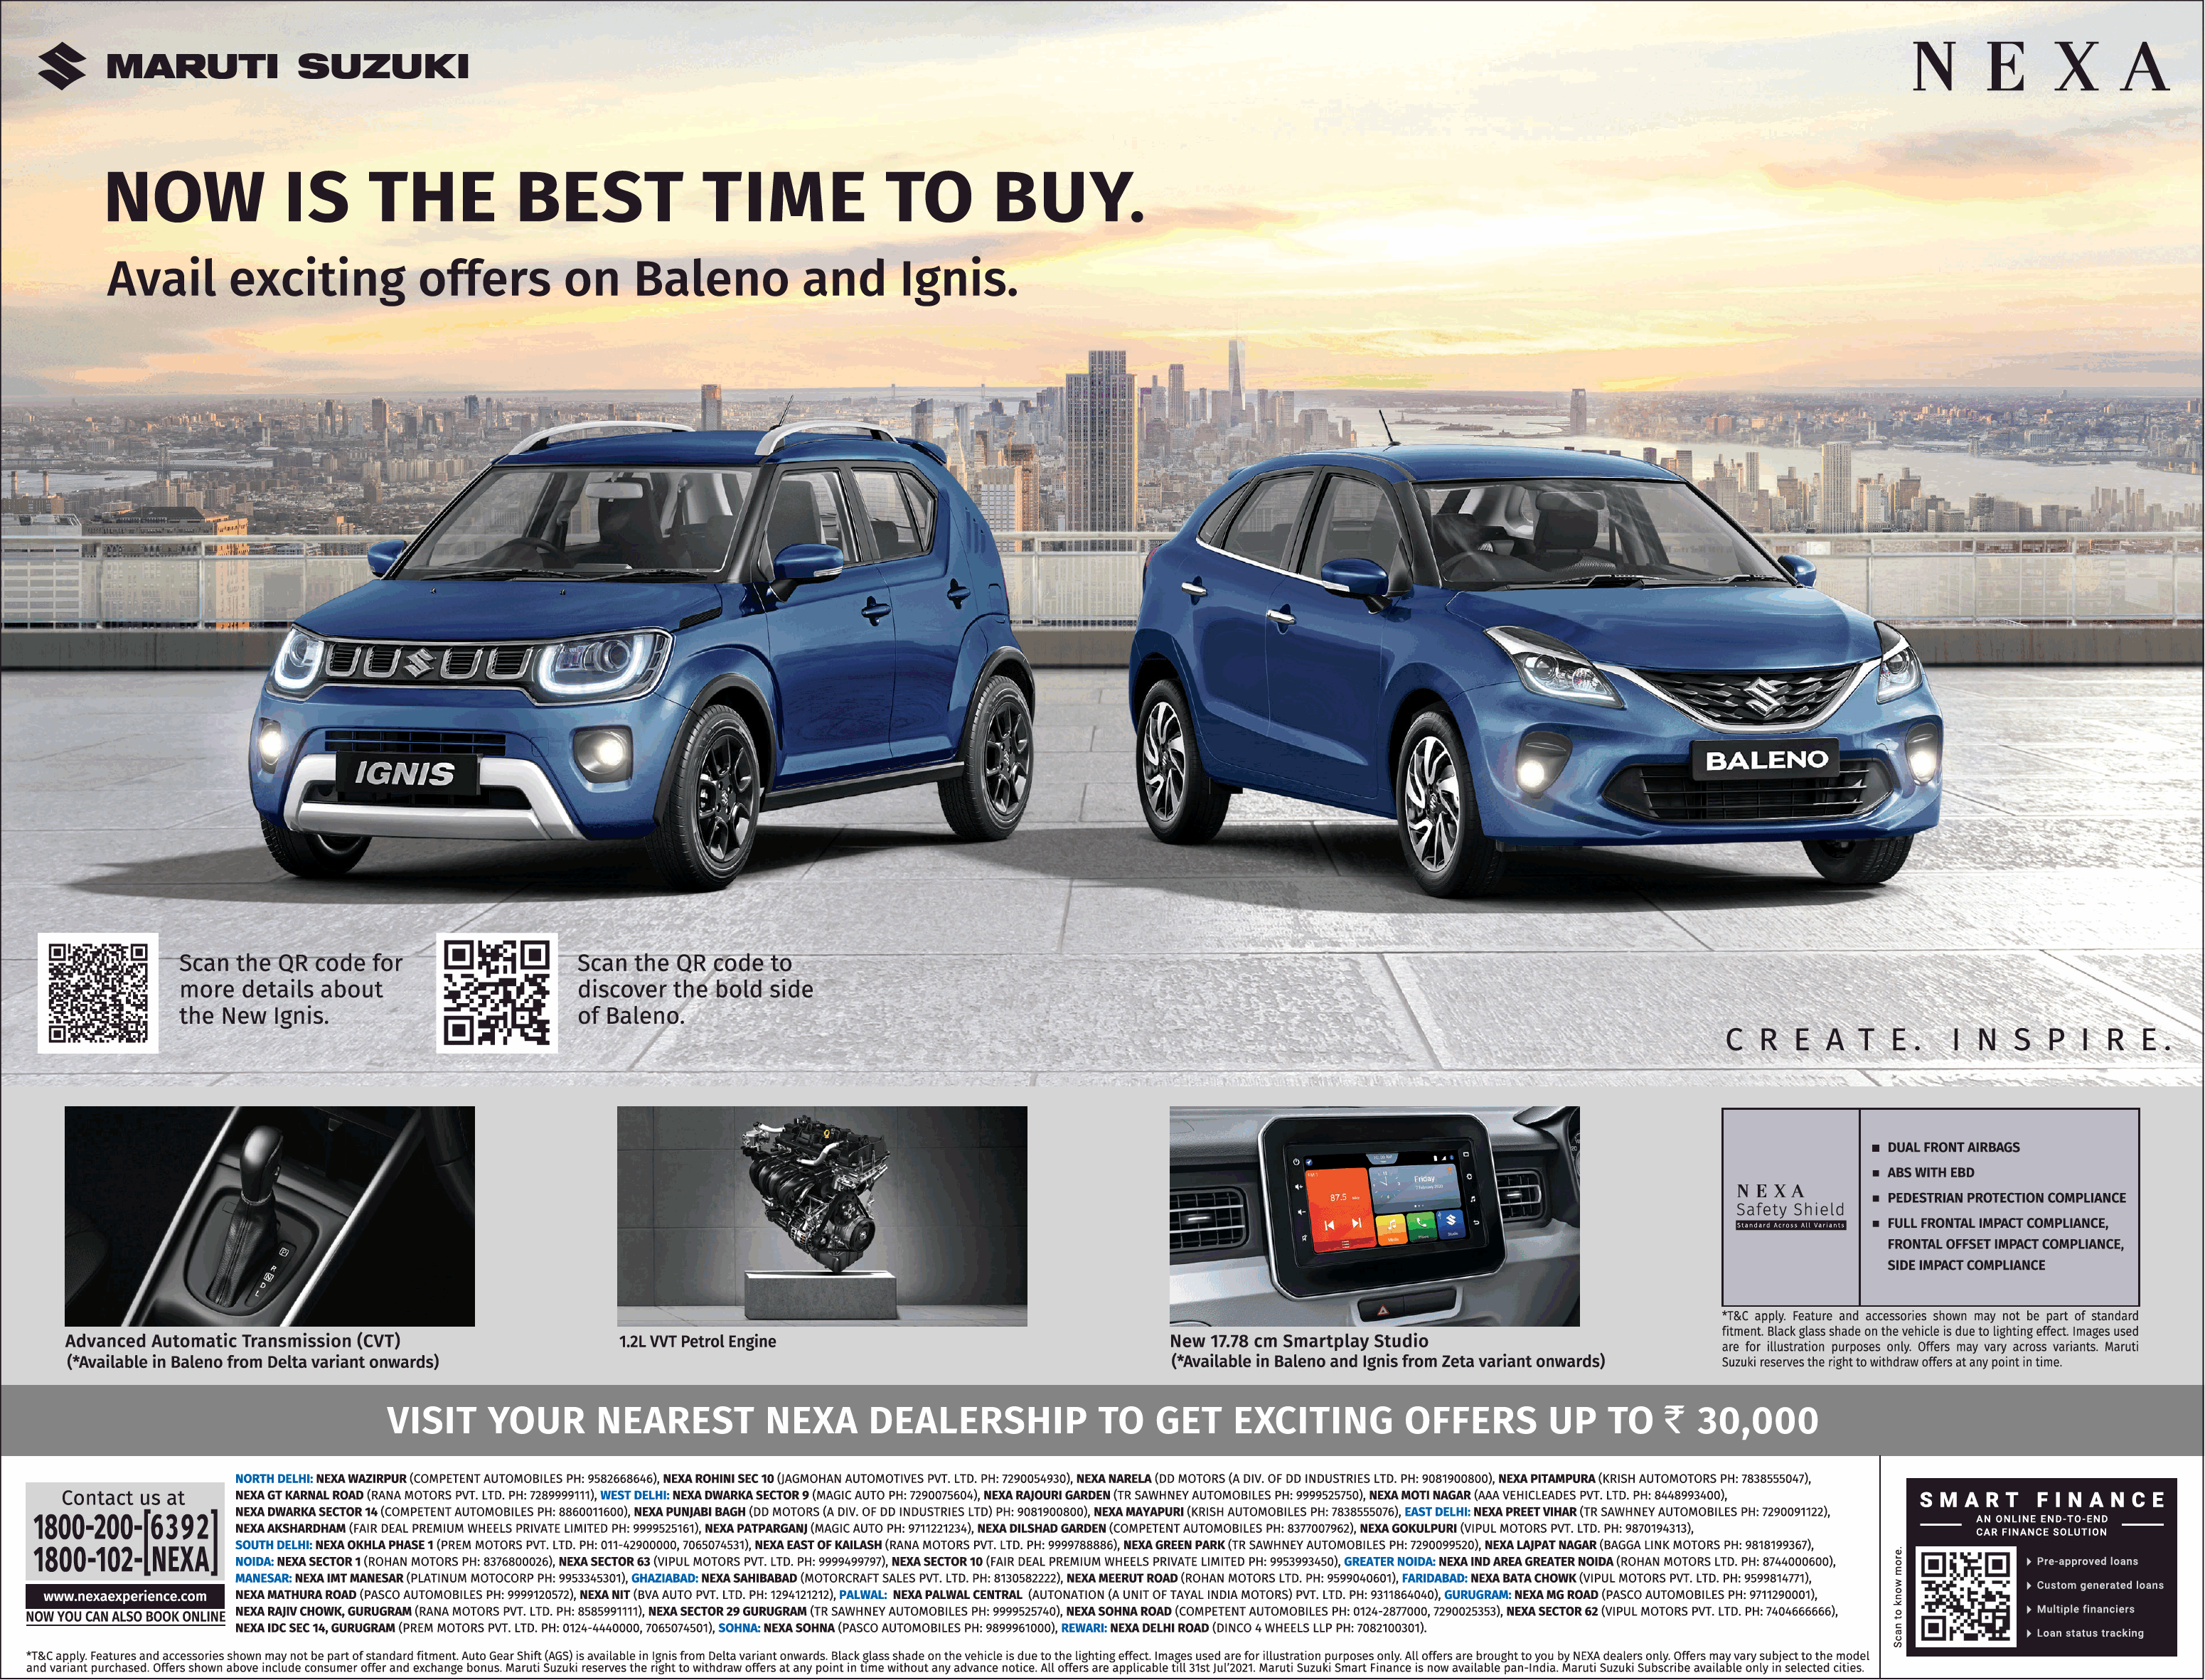 maruti-suzuki-now-is-the-best-time-to-buy-ignis-baleno-ad-times-of-india-delhi-9-7-2021